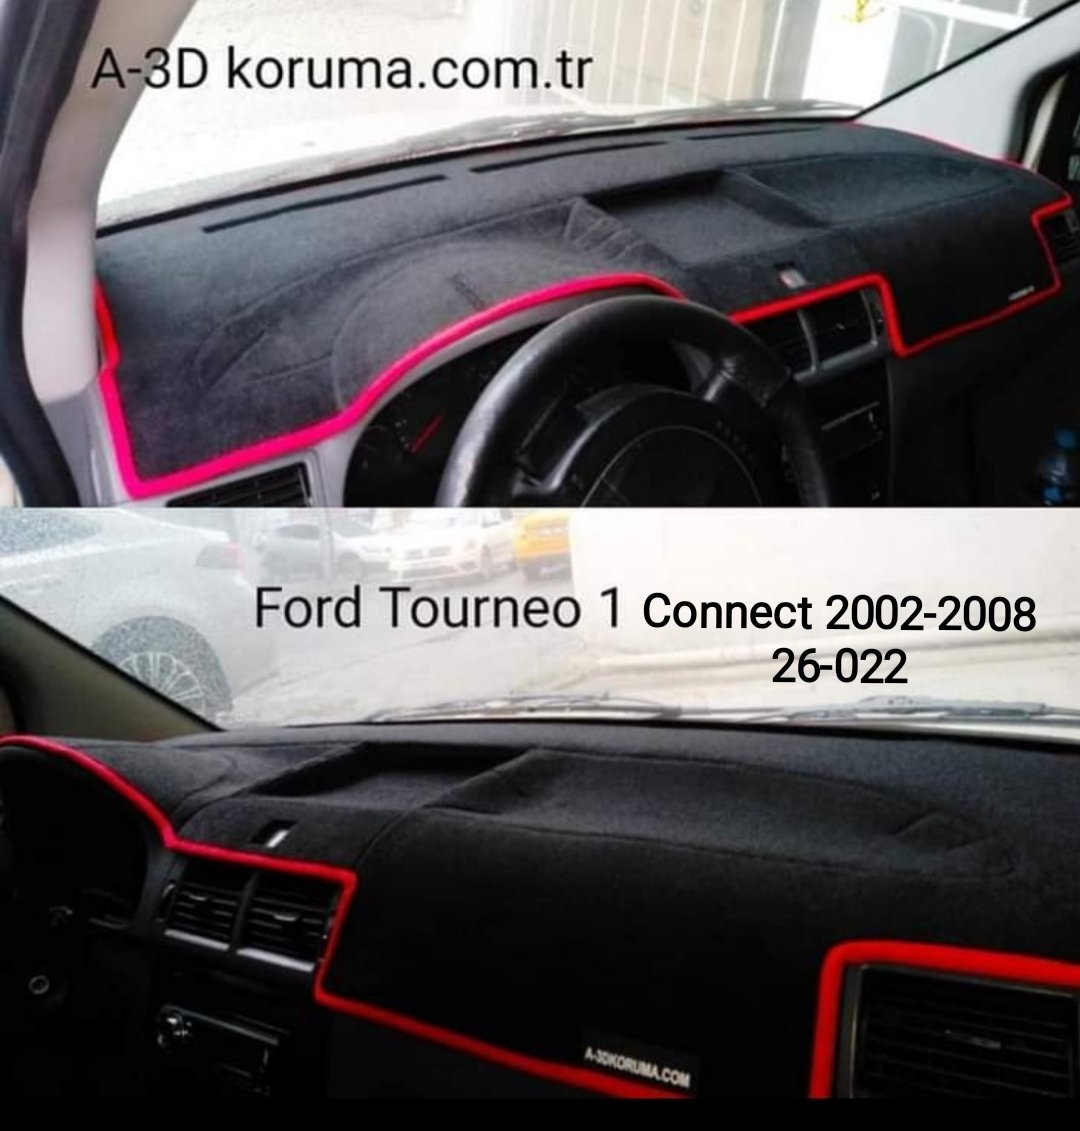 FORD TOURNEO CONNECT 2002-2008